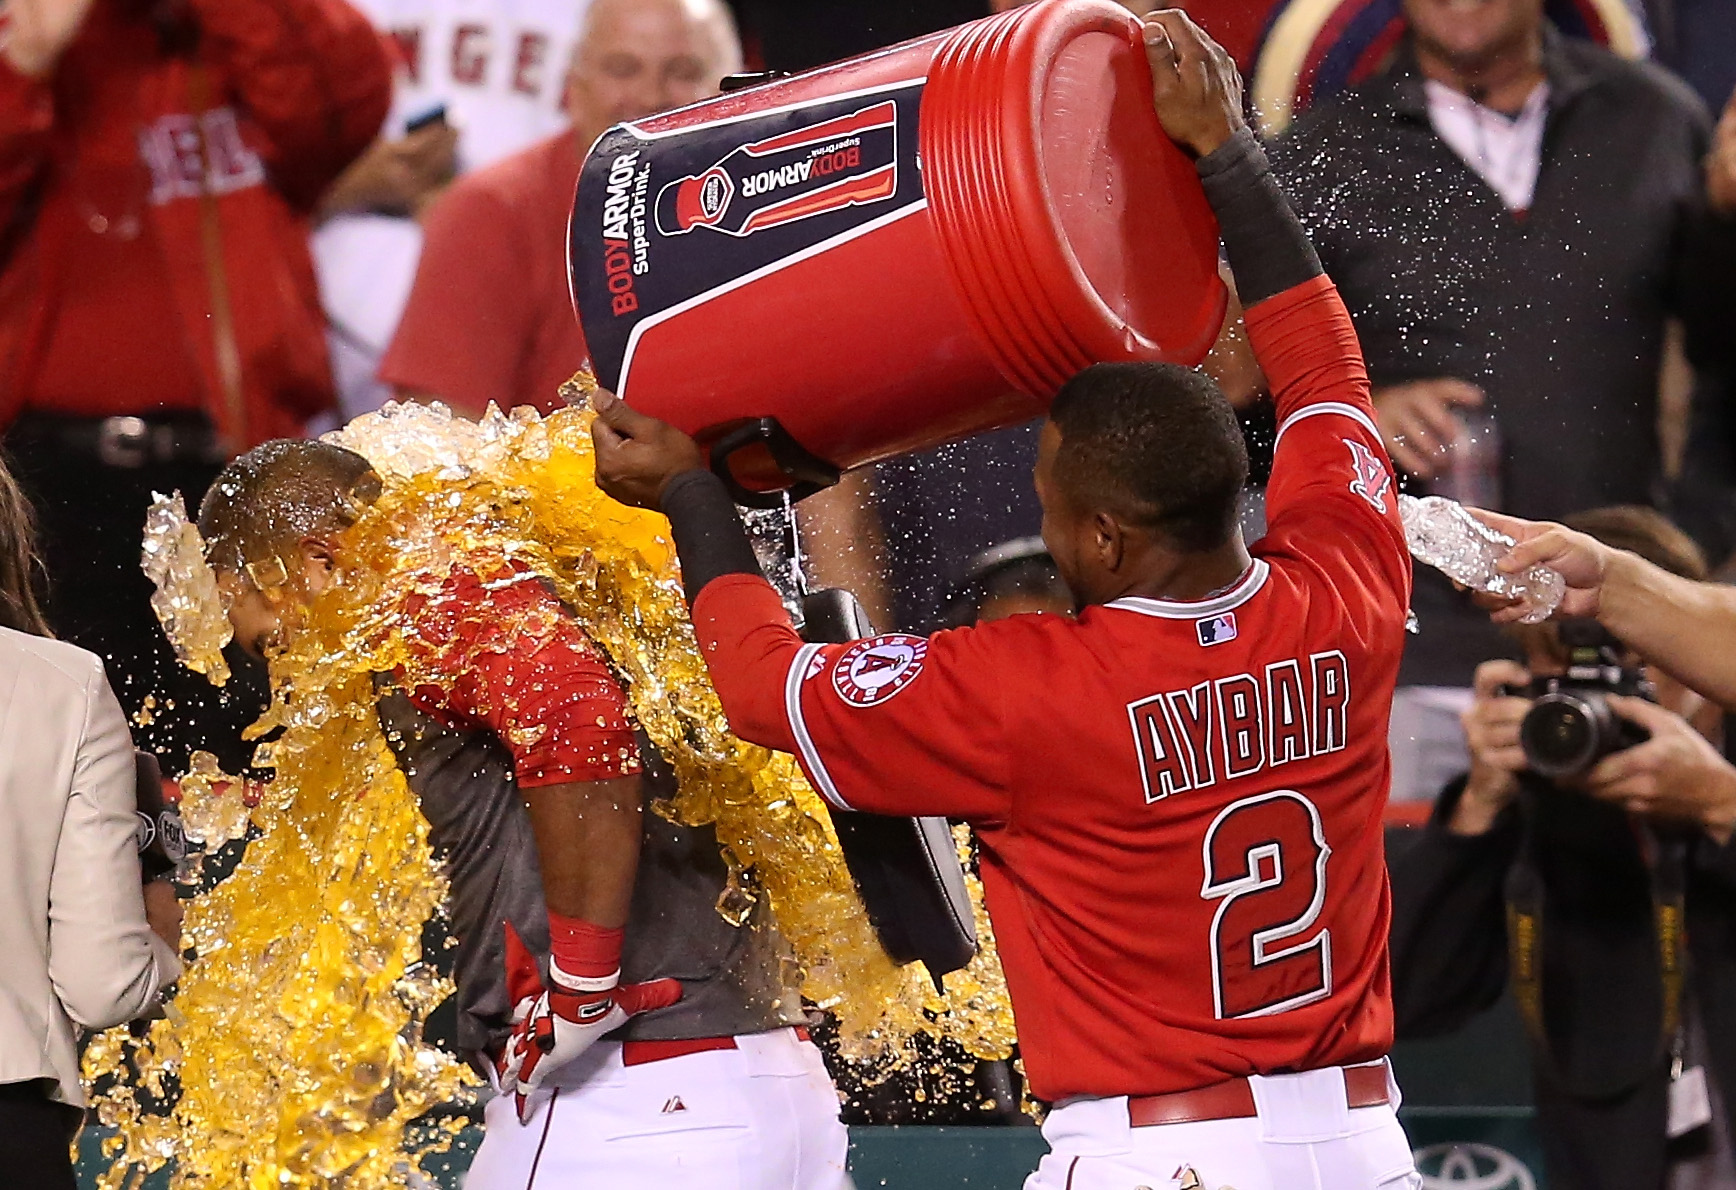 PHOTO: Carlos Perez is doused with sports drink by Erck Aybar after Perez led off the ninth inning with a walk-off home run, May 5, 2015 in Anaheim, California.